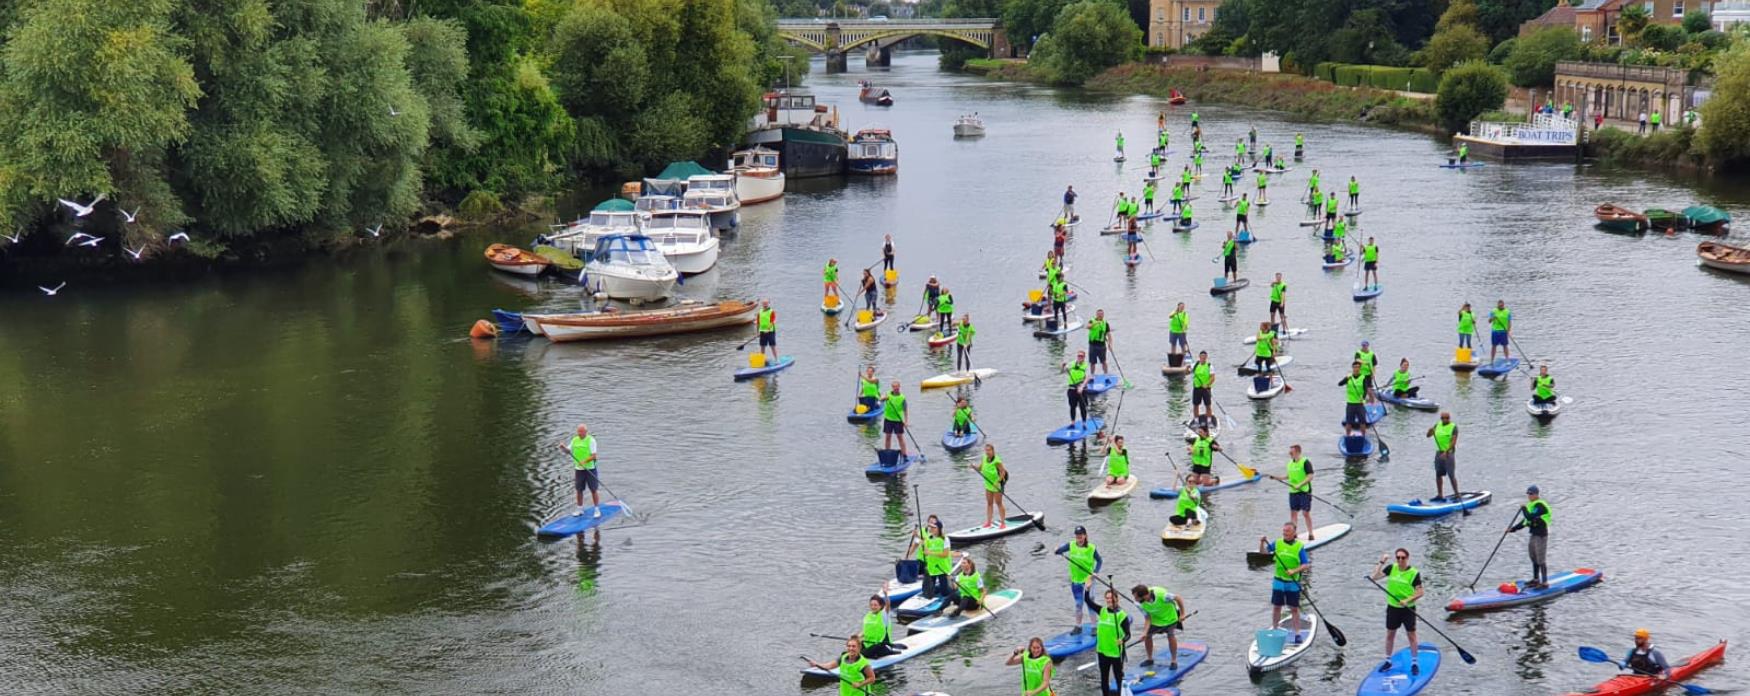 Paddle boarding in Richmond on River Thames